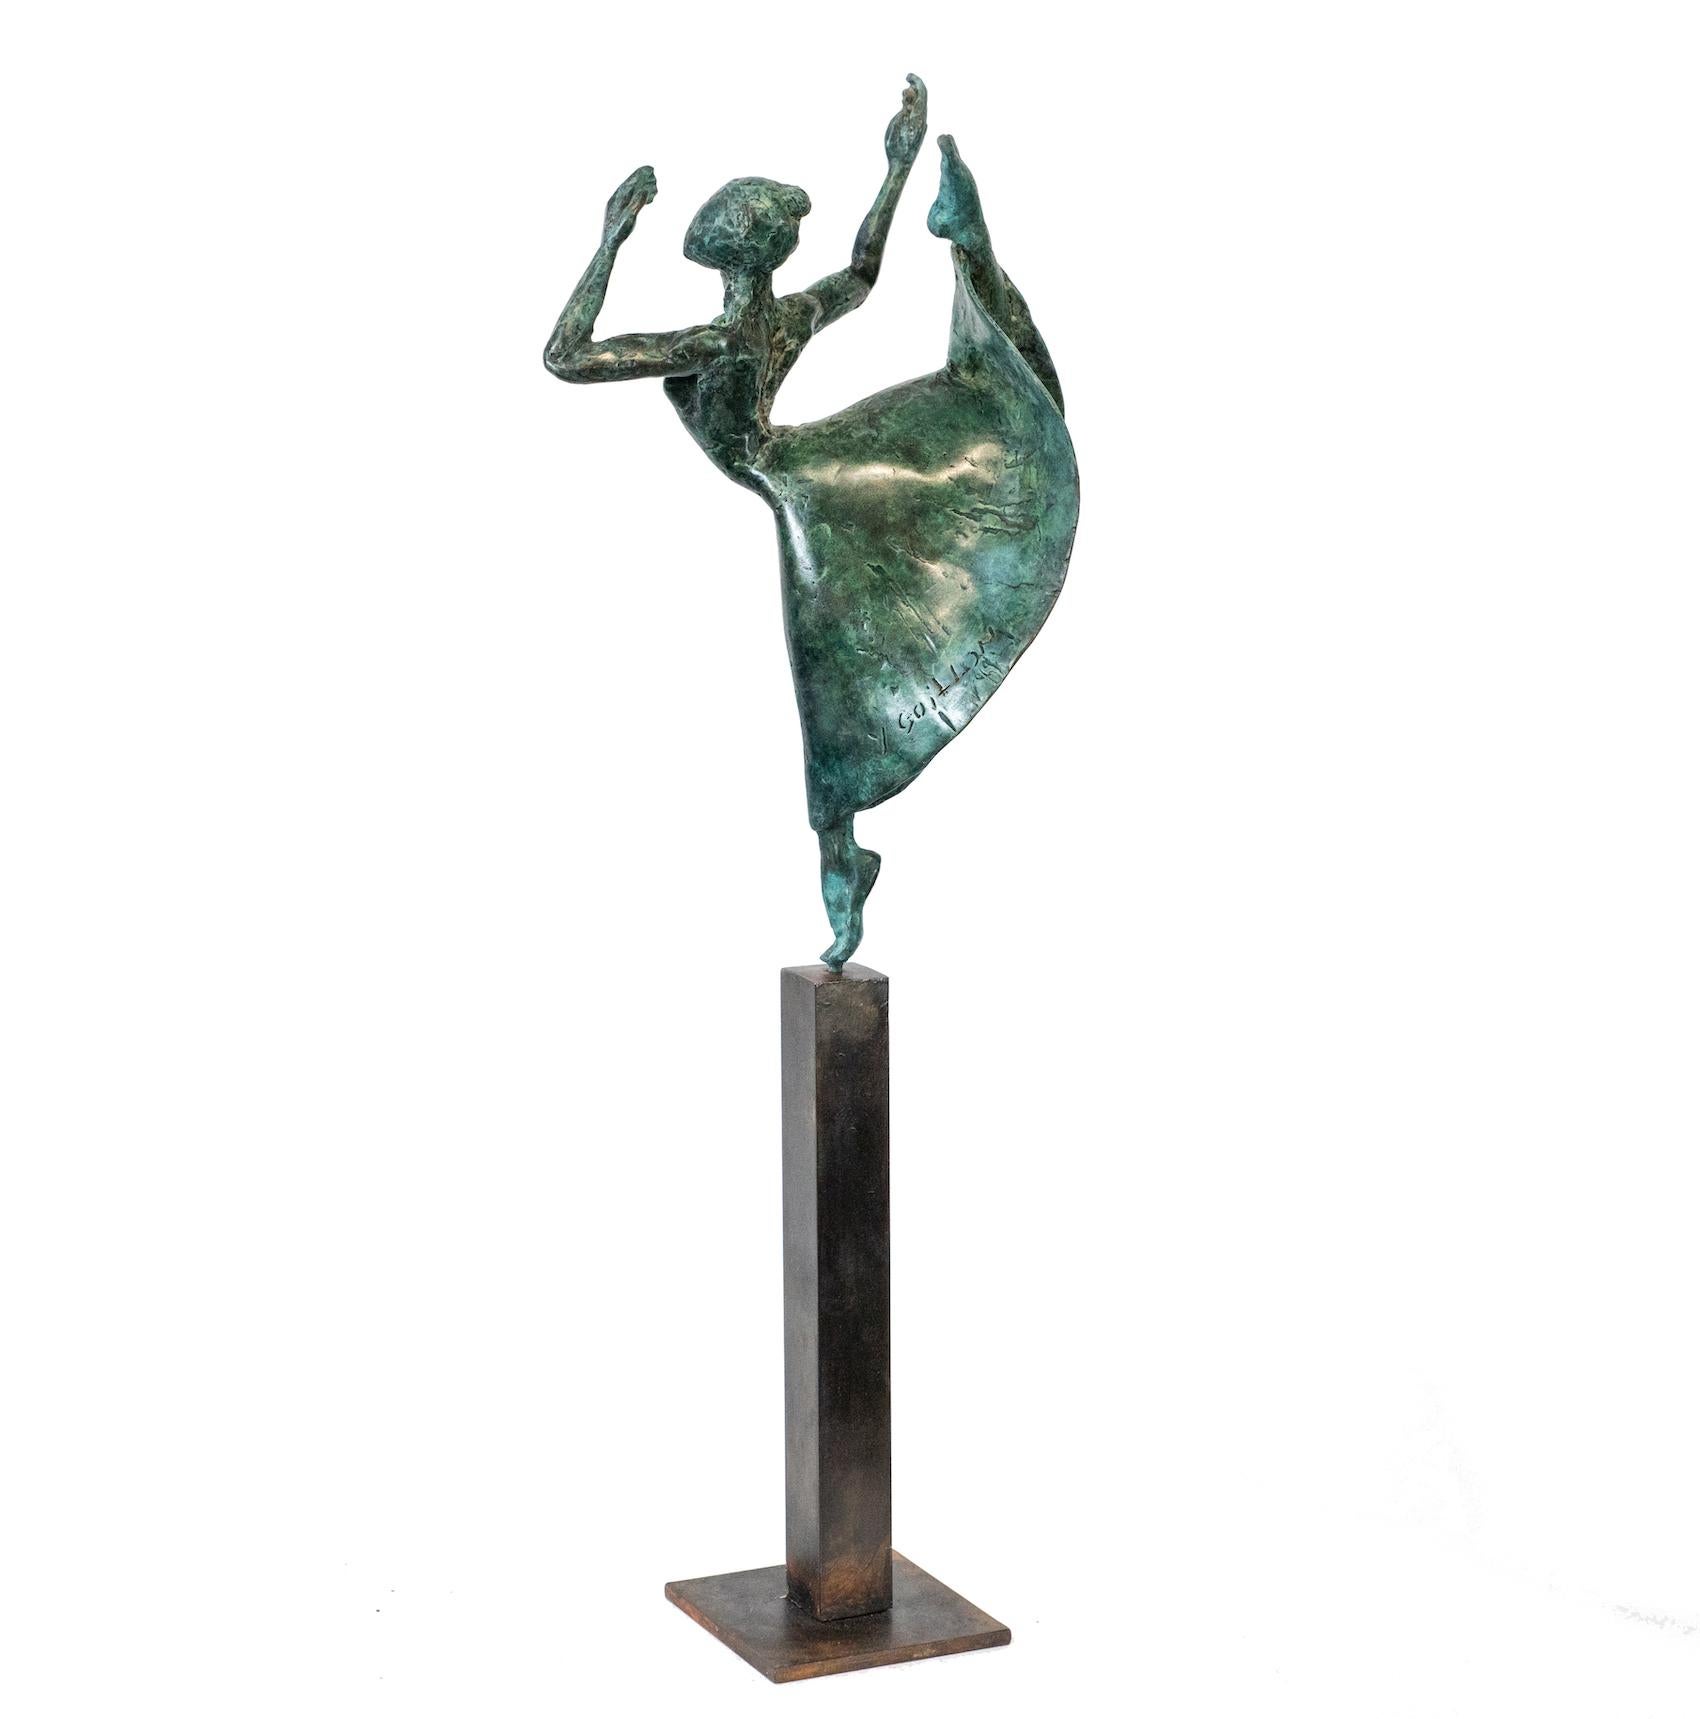 Modern dancer I is a bronze sculpture by contemporary artist Yann Guillon, dimensions are 28 × 15 × 10 cm (11 × 5.9 × 3.9 in). Height of the sculpture with the metal base: 48 cm (18.9 in). The sculpture is signed and numbered, it is part of a